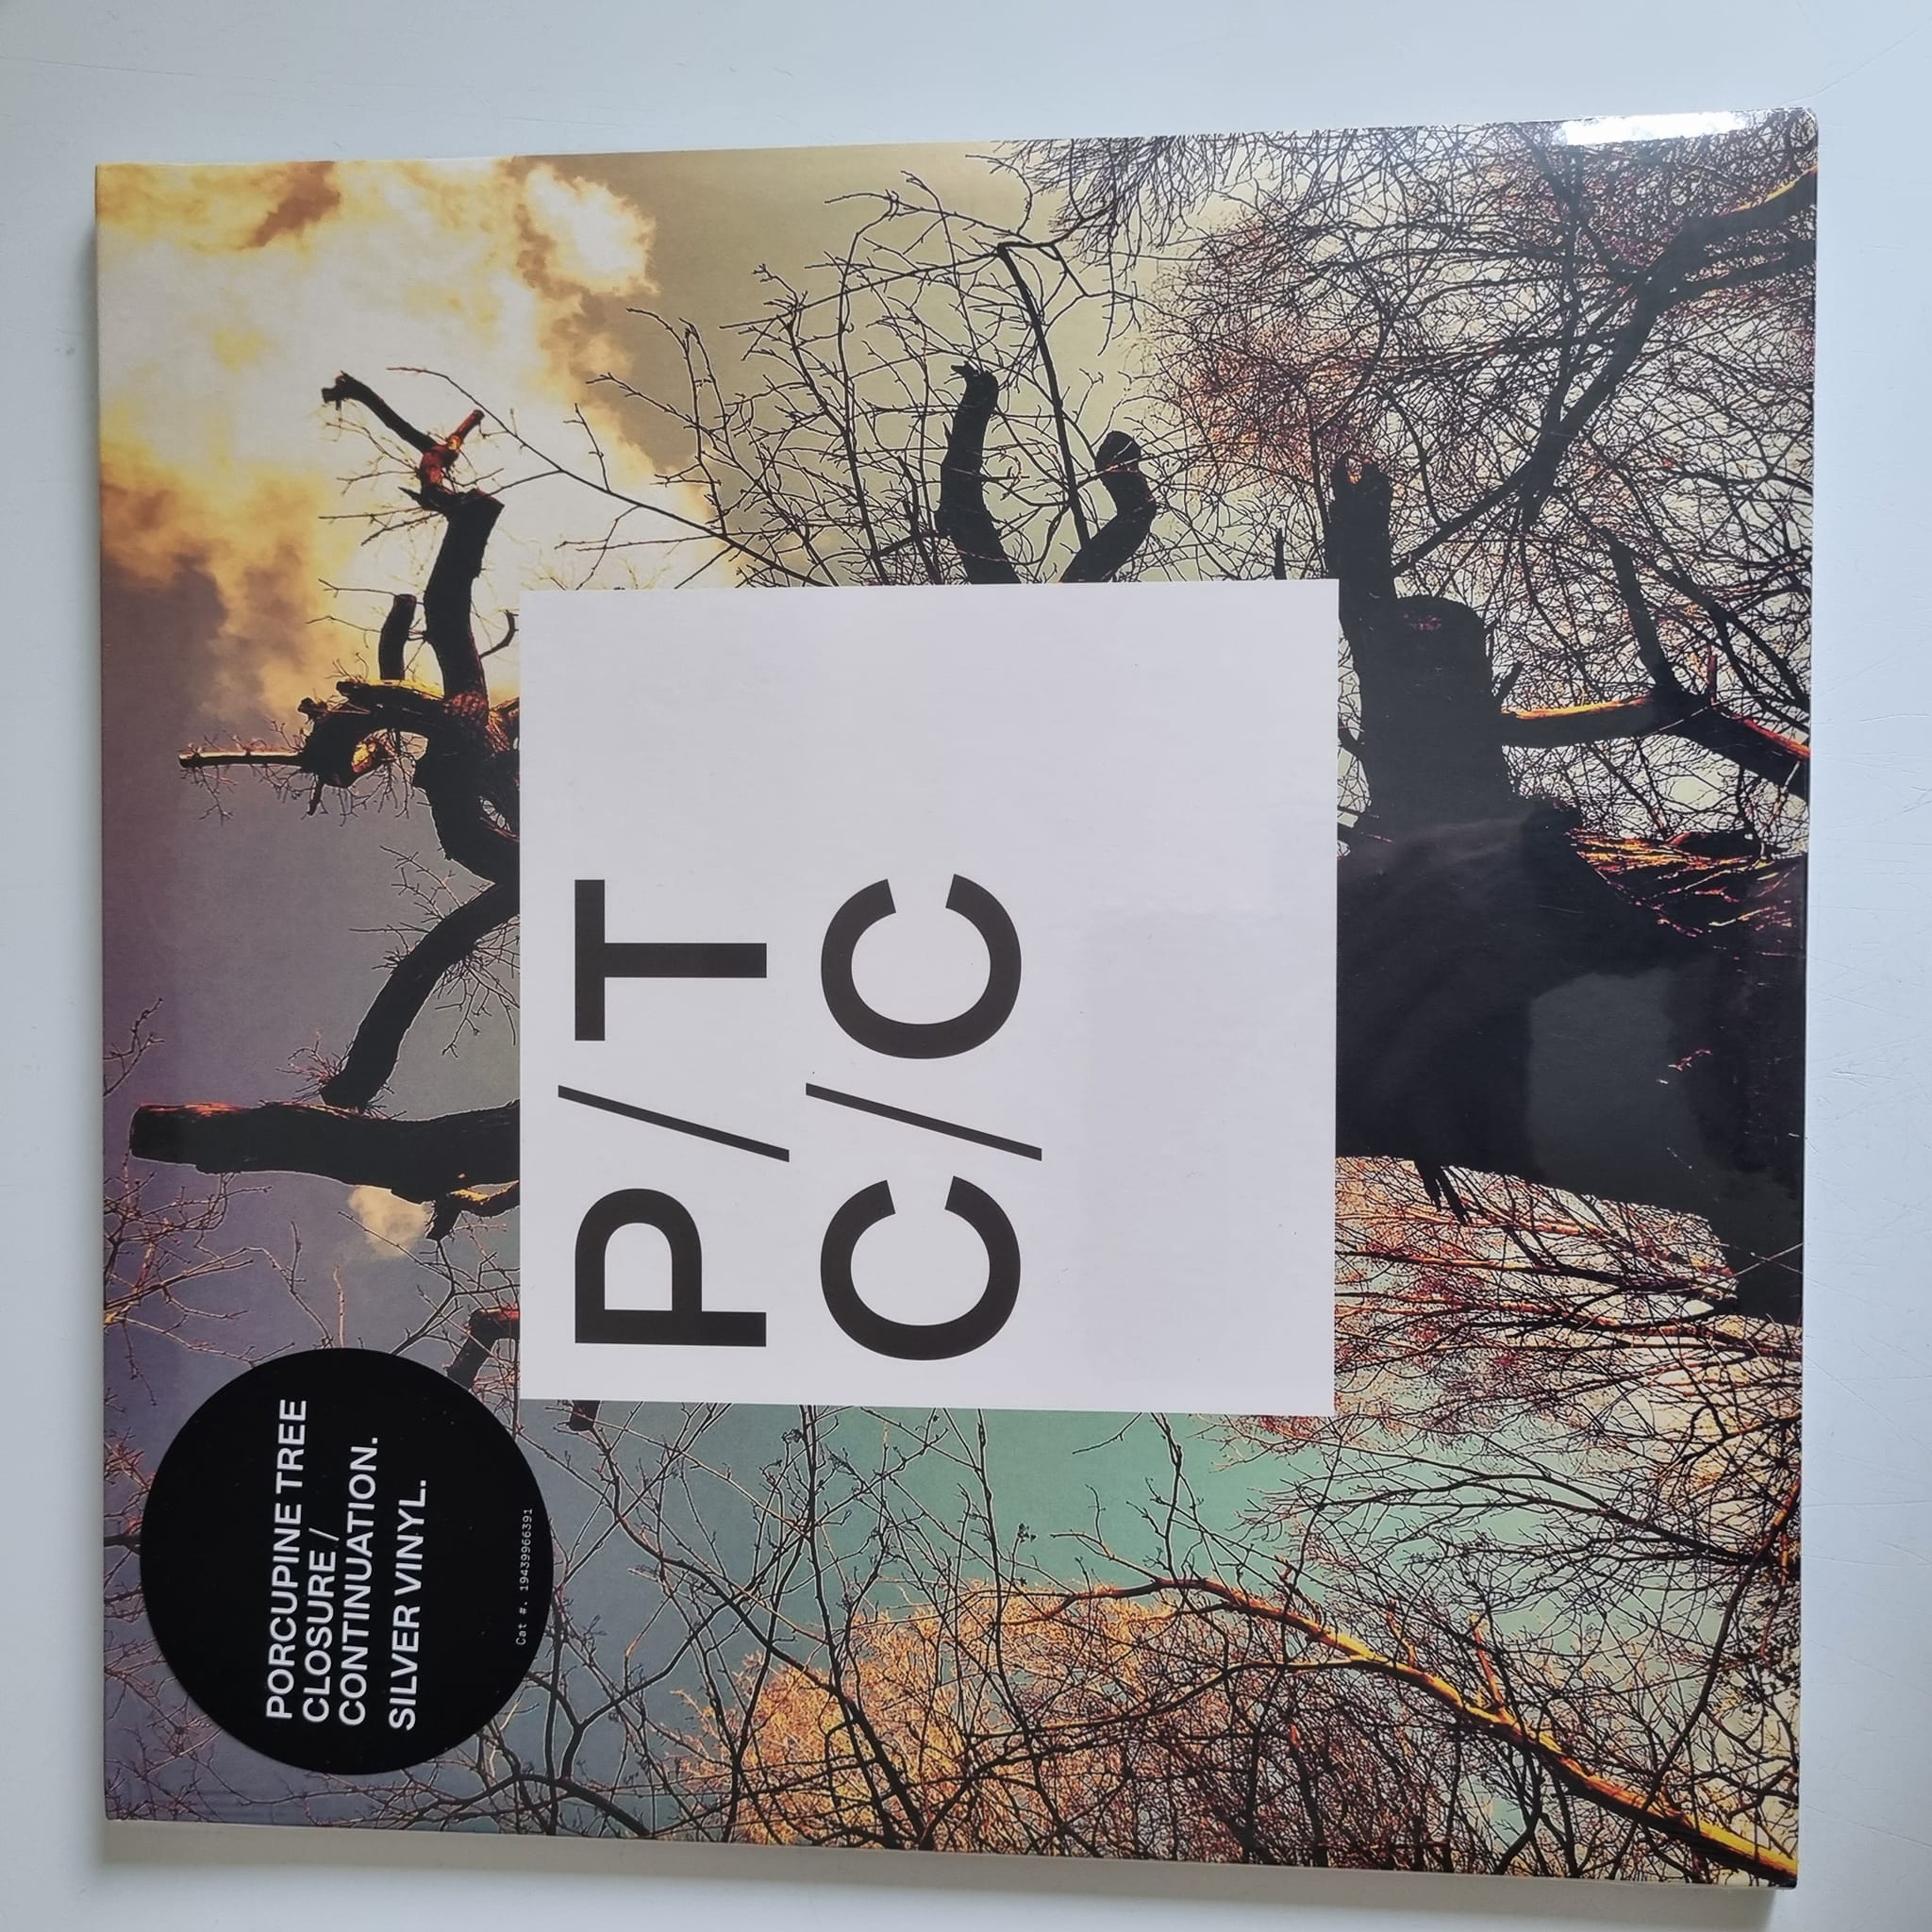 Buy this rare Porcupine Tree record by clicking here